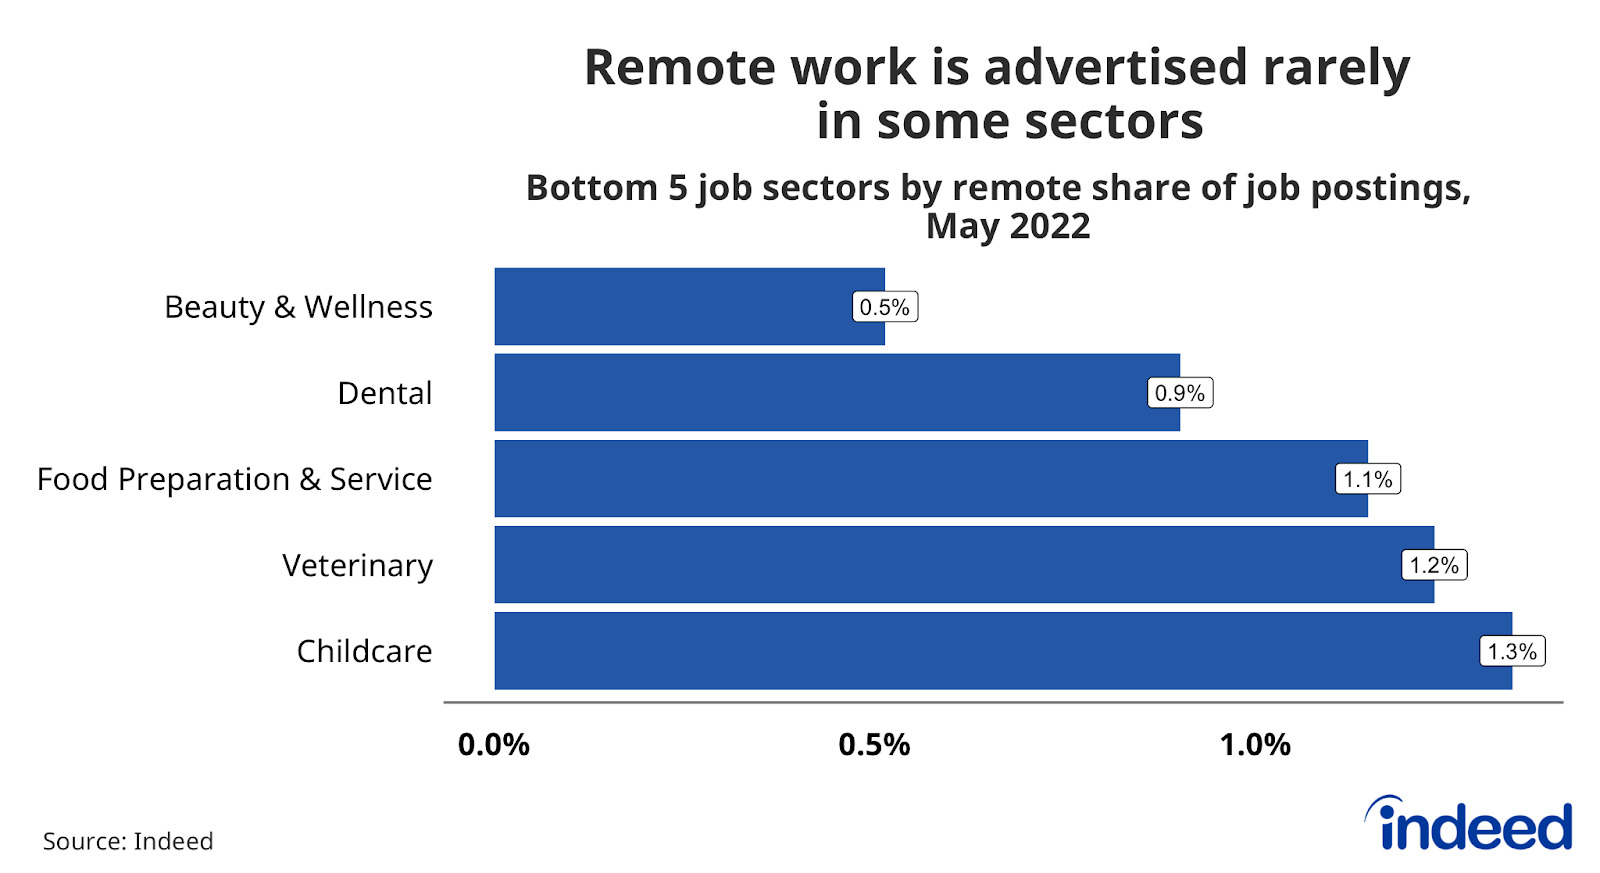 Horizontal bar chart titled “Remote work is advertised rarely in some sectors.” 